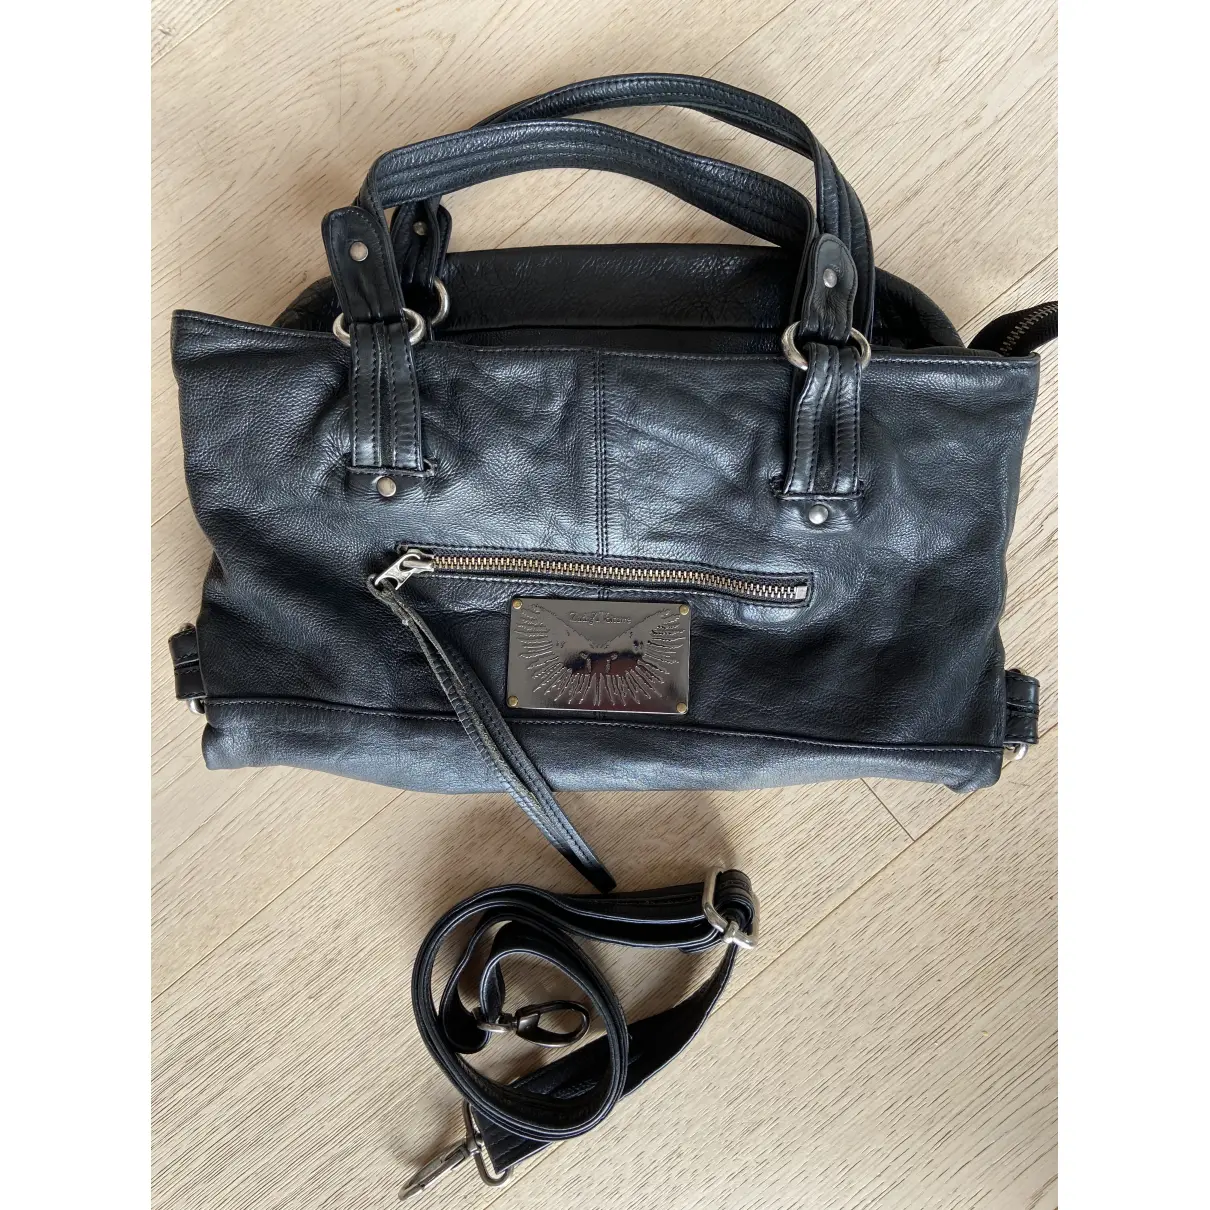 Touly leather handbag Zadig & Voltaire